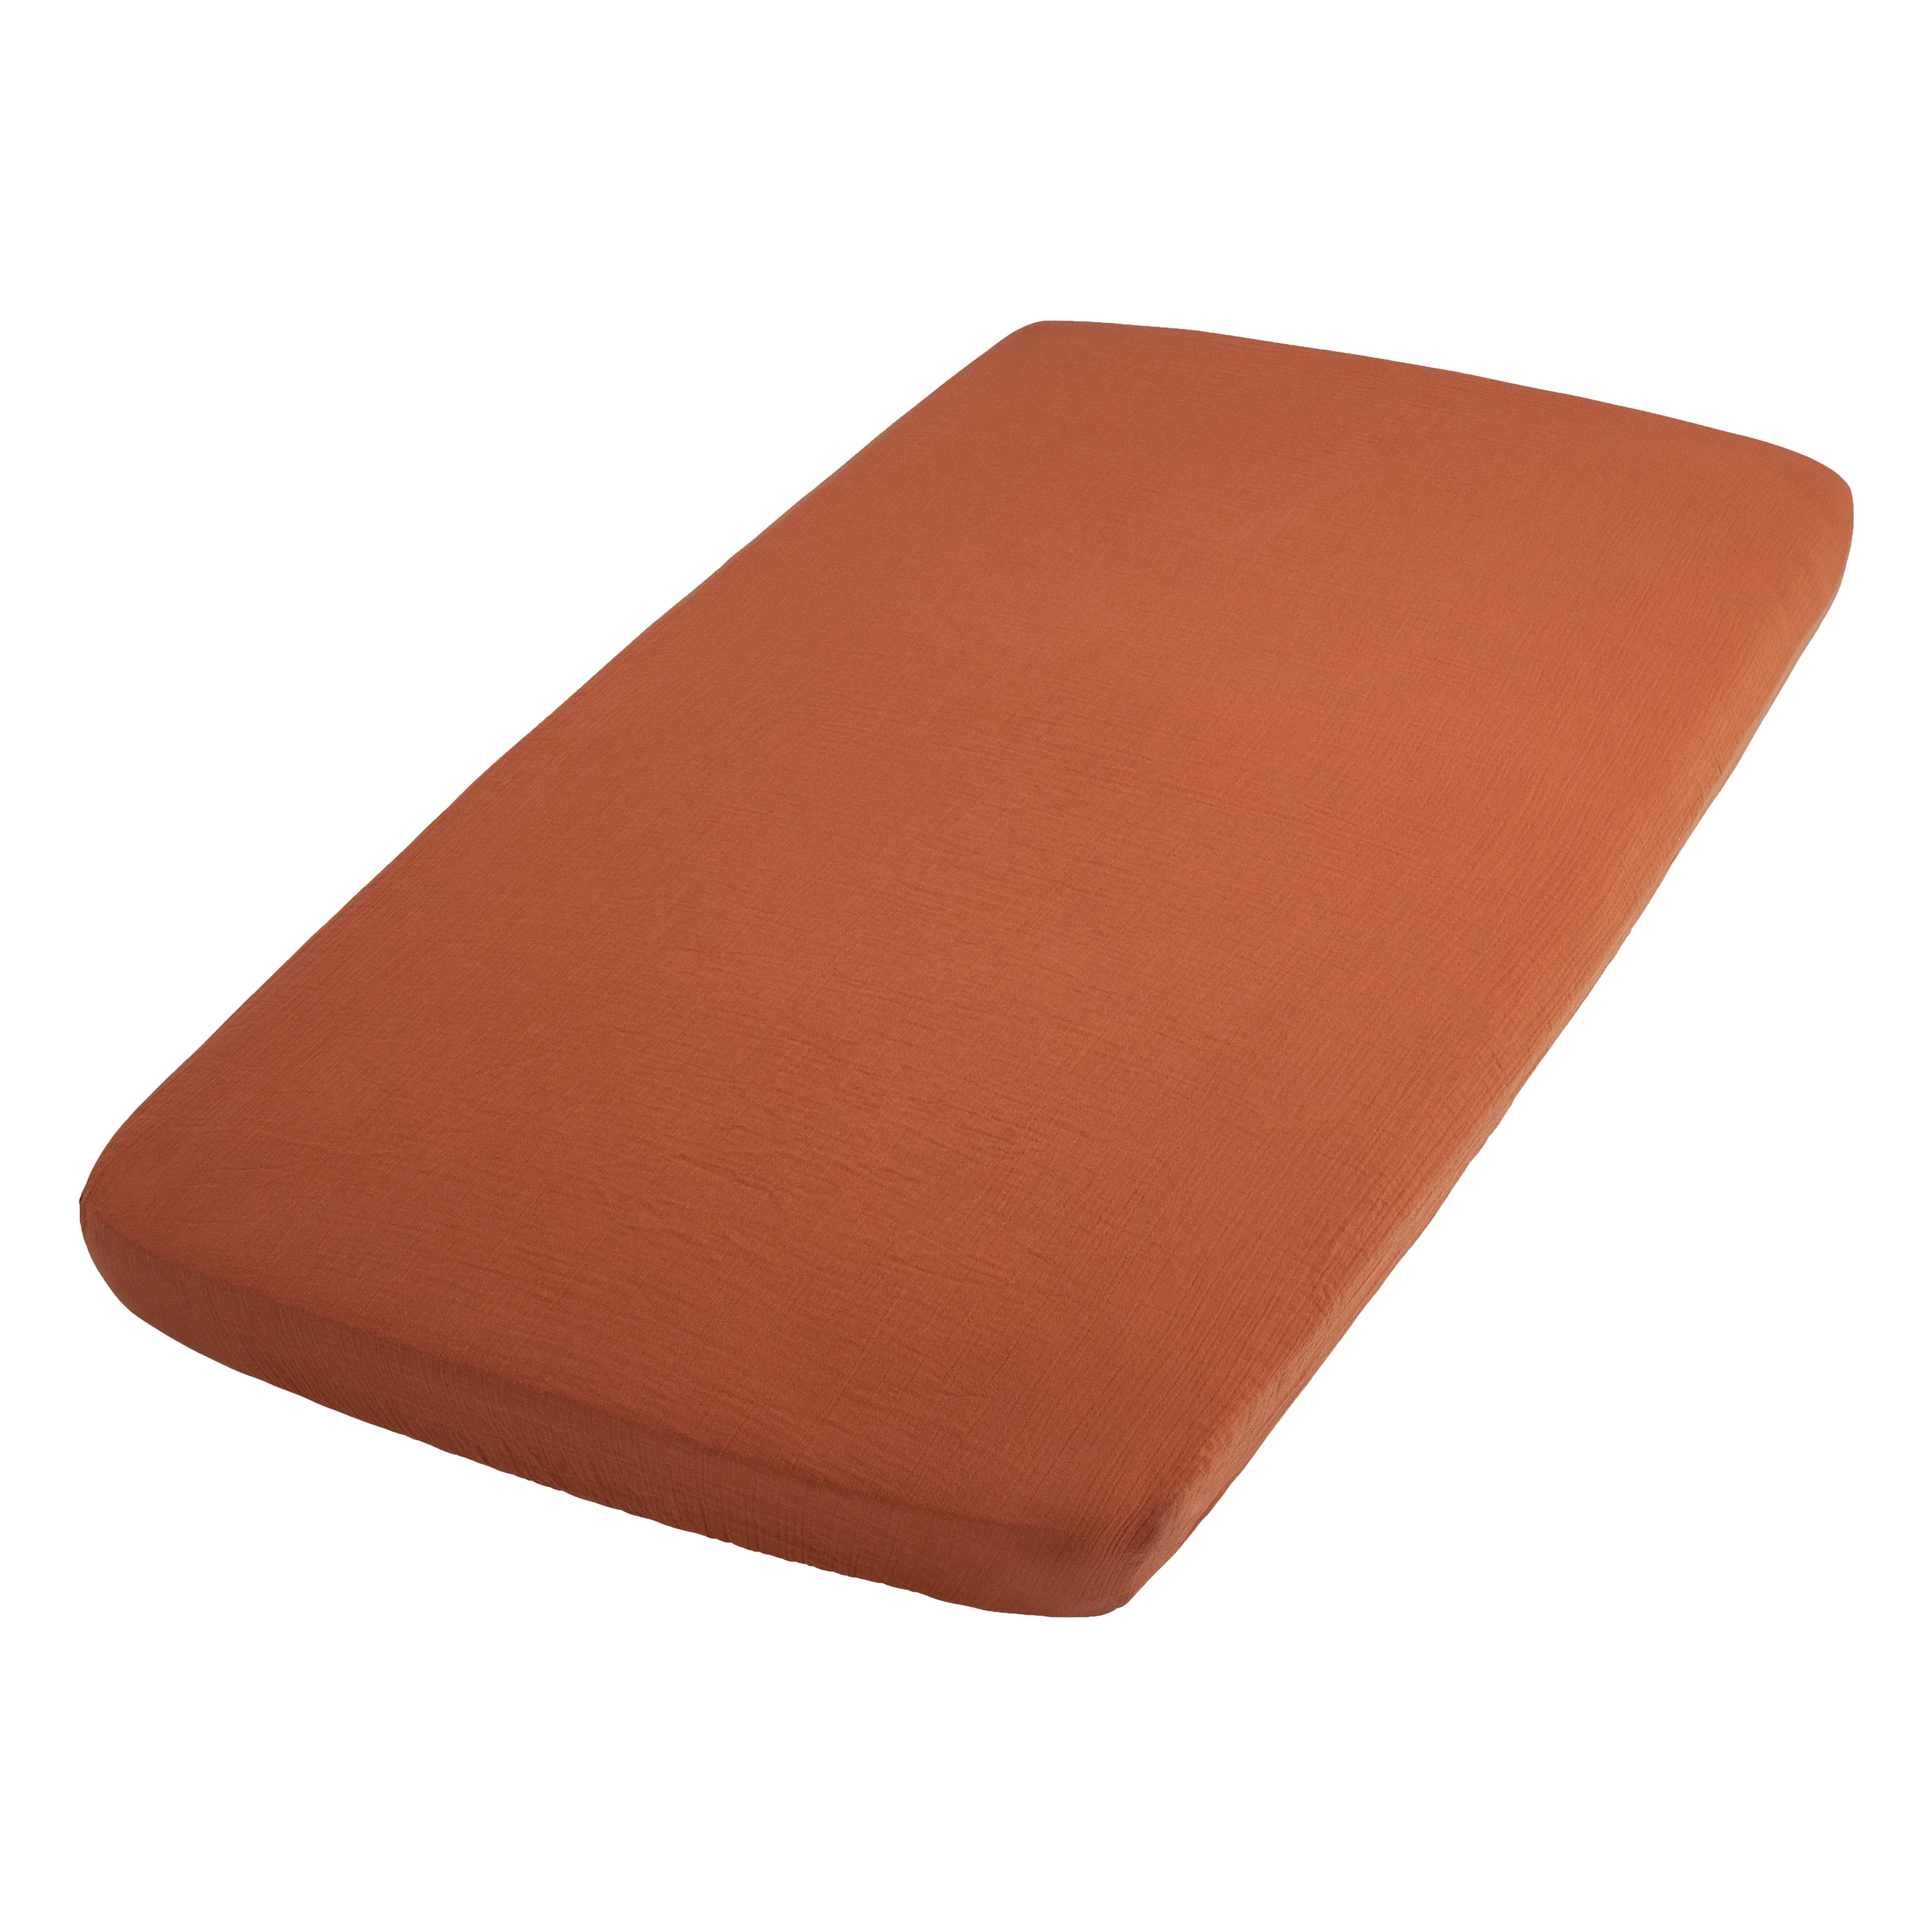 Fitted sheet Breeze rust - 60x120